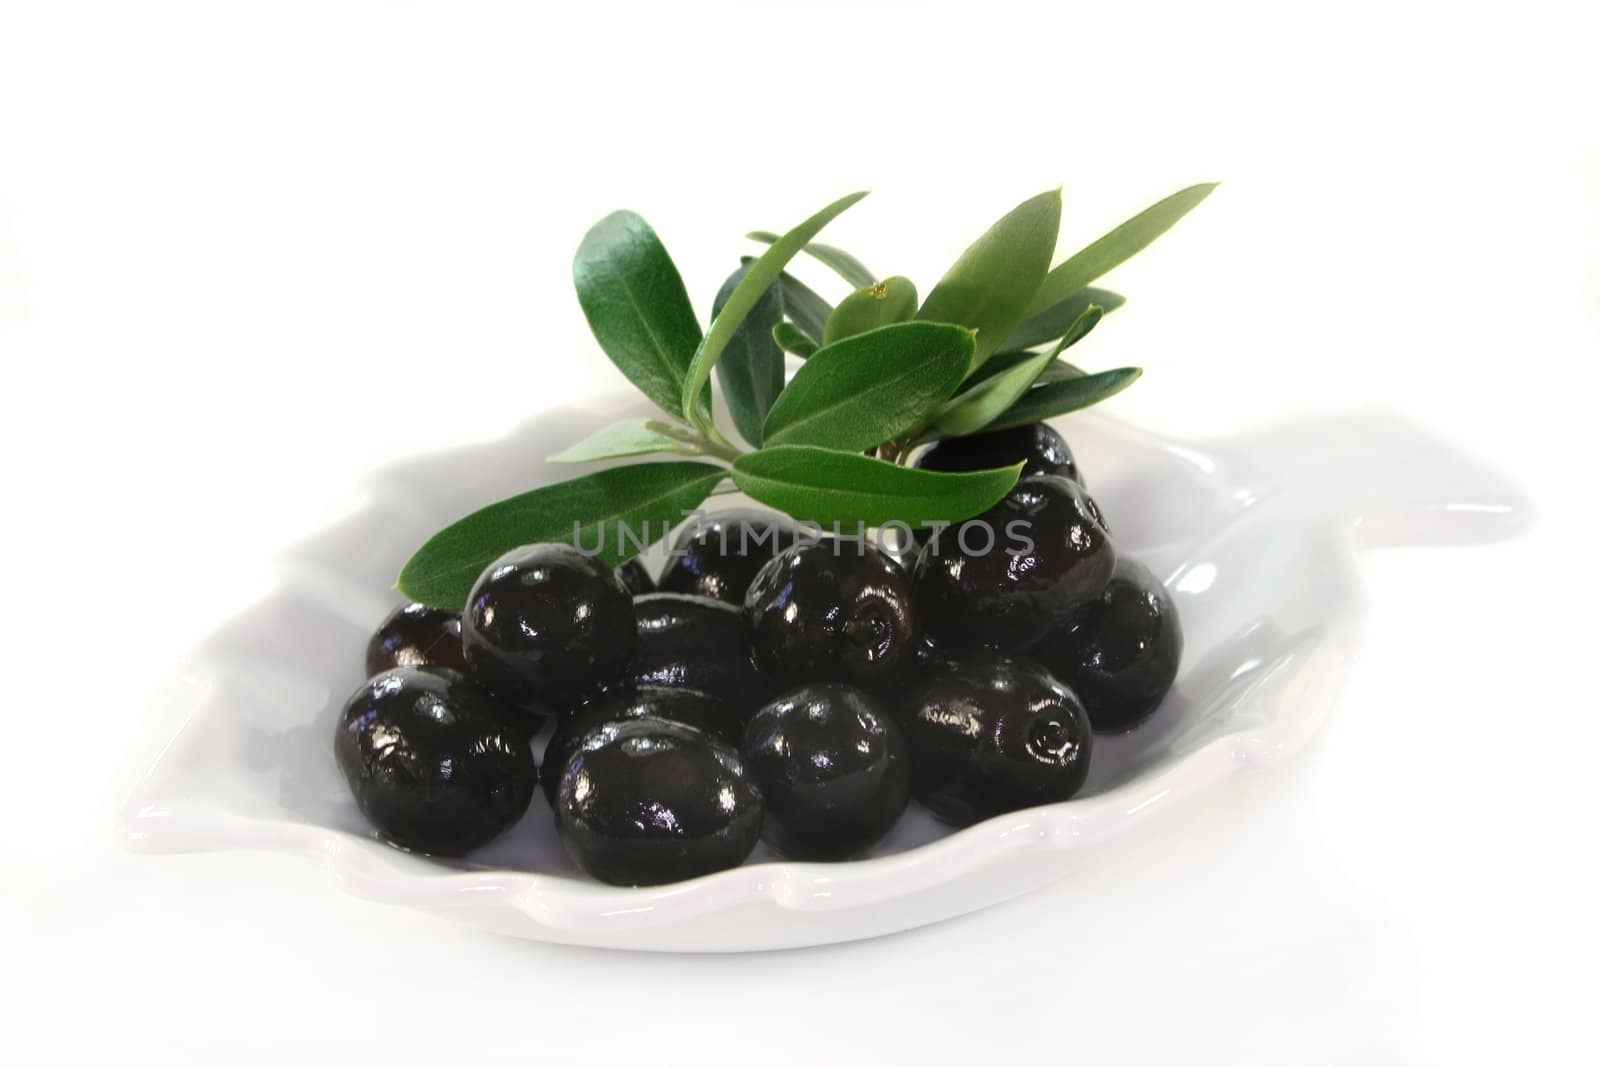 Olives and olive branch on a white background